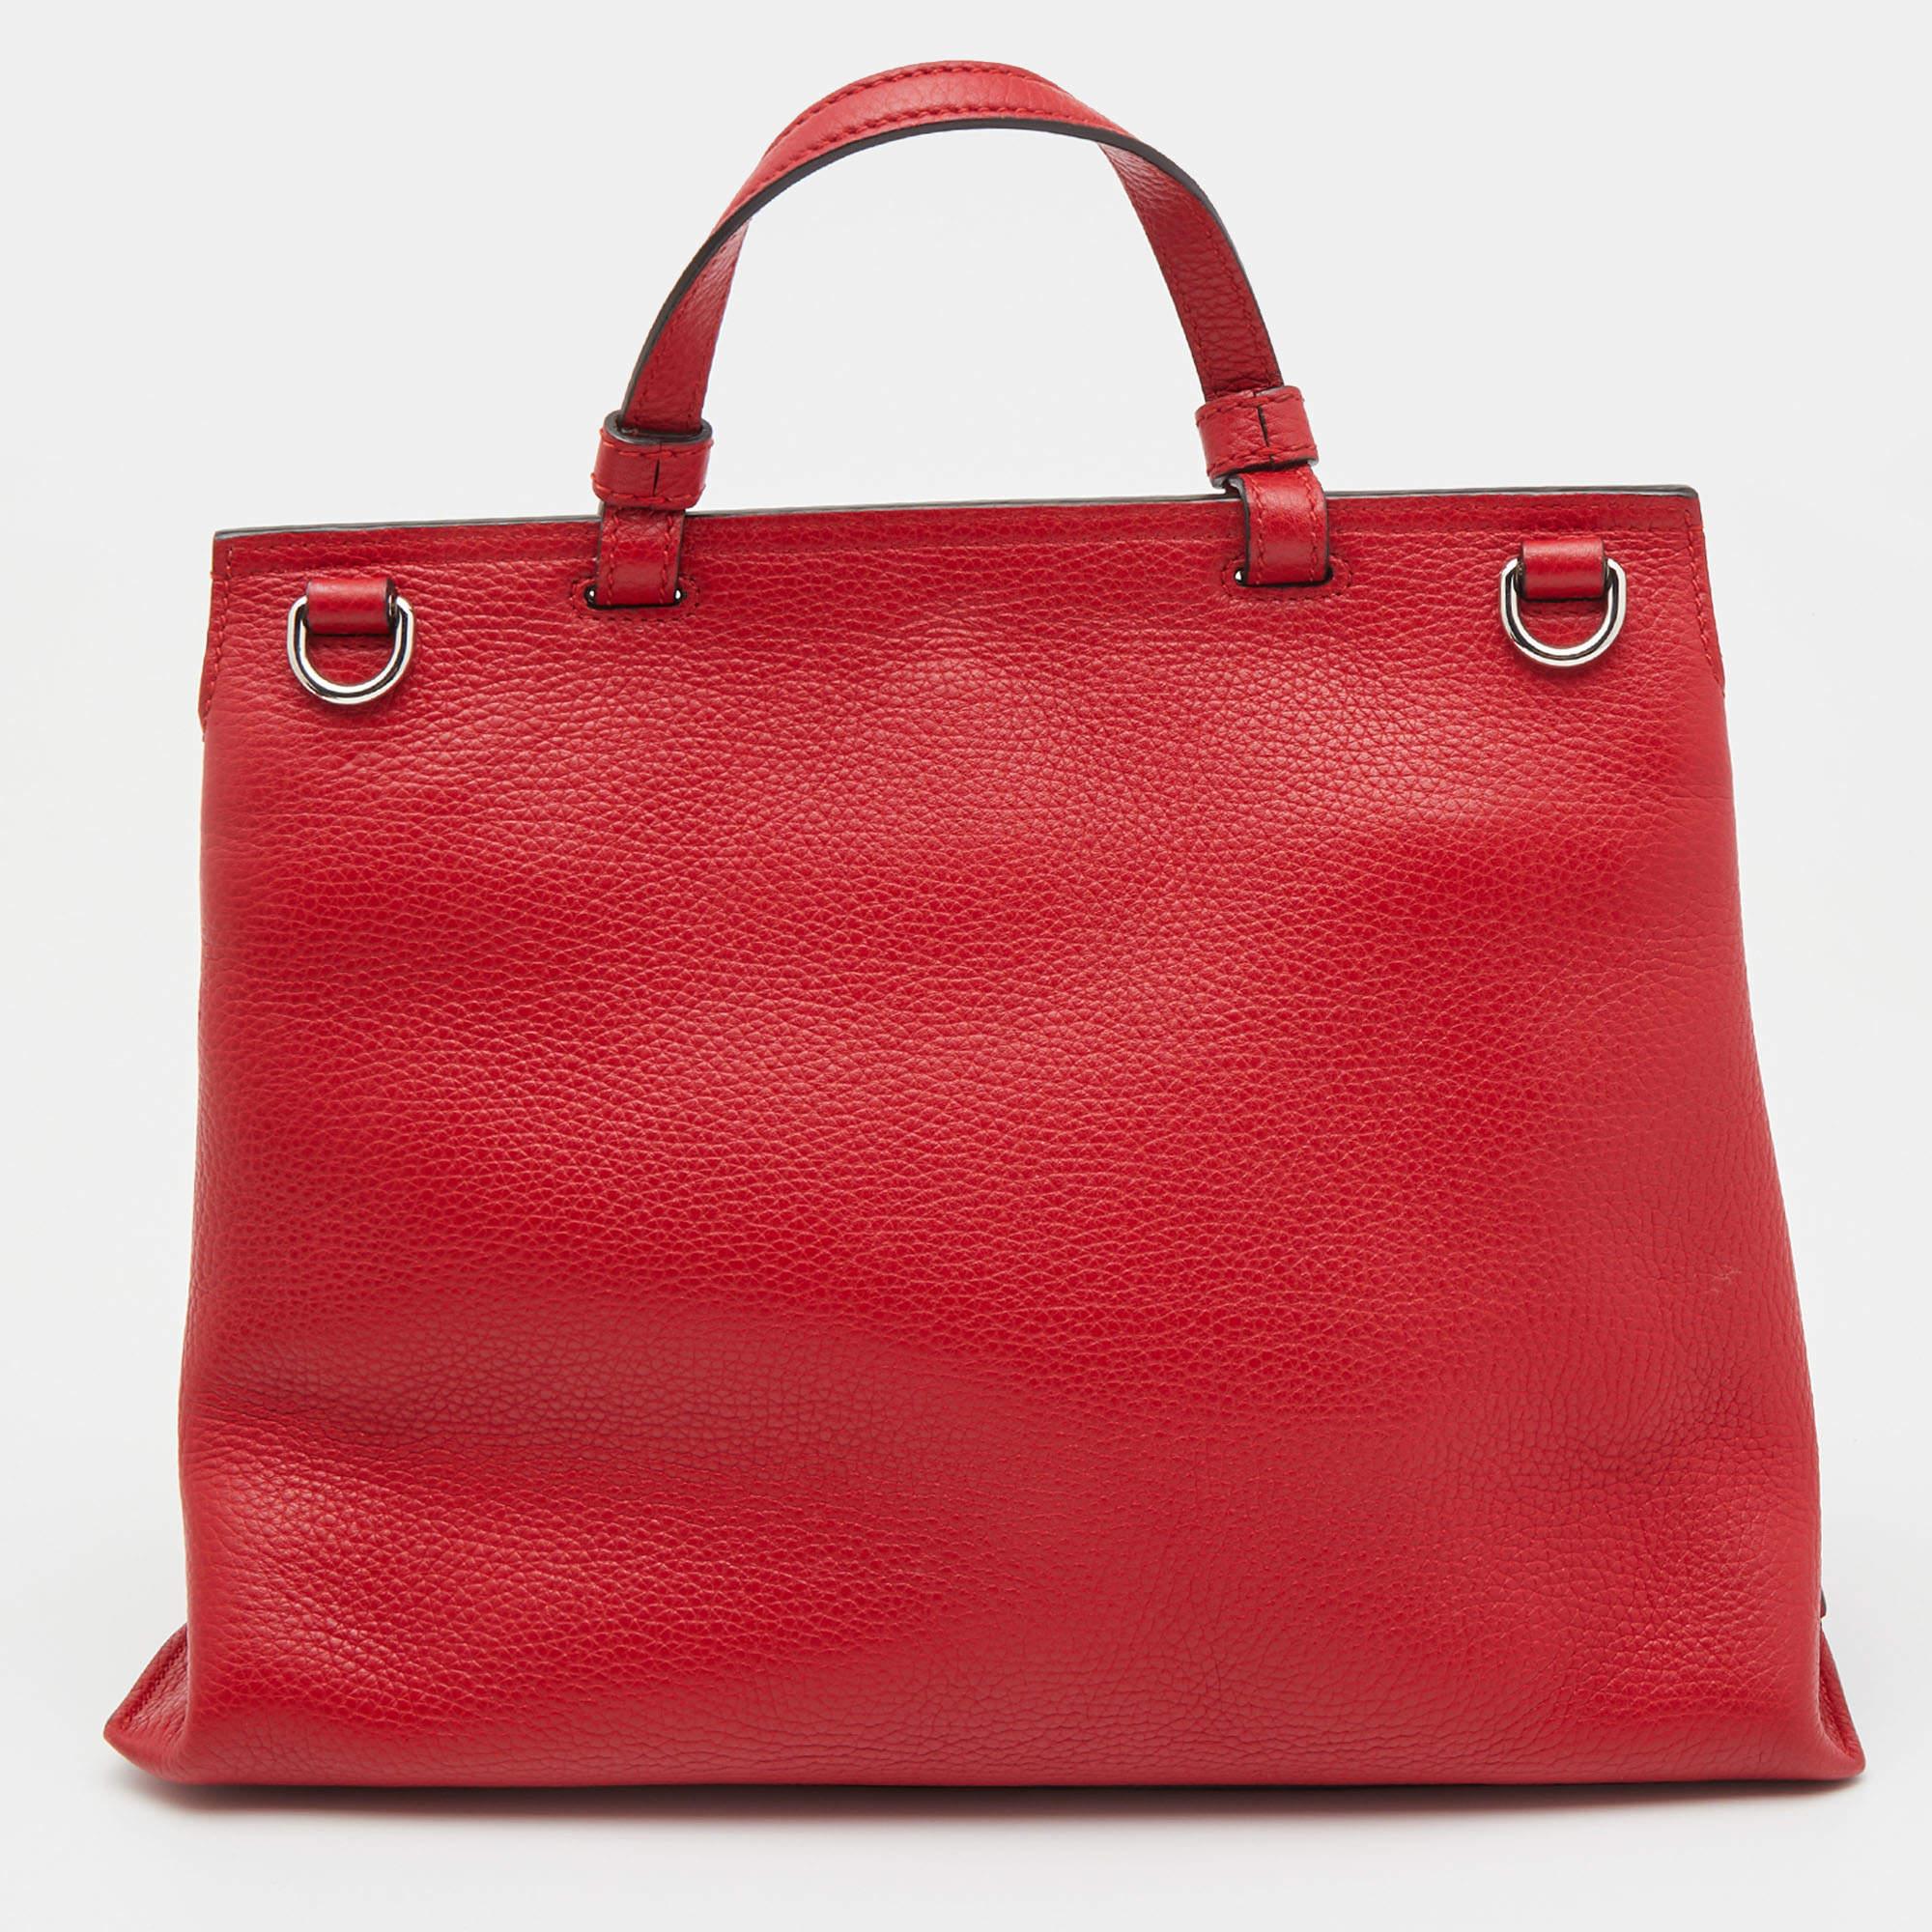 Gucci Red Leather Medium Bamboo Daily Top Handle Bag In Good Condition For Sale In Dubai, Al Qouz 2